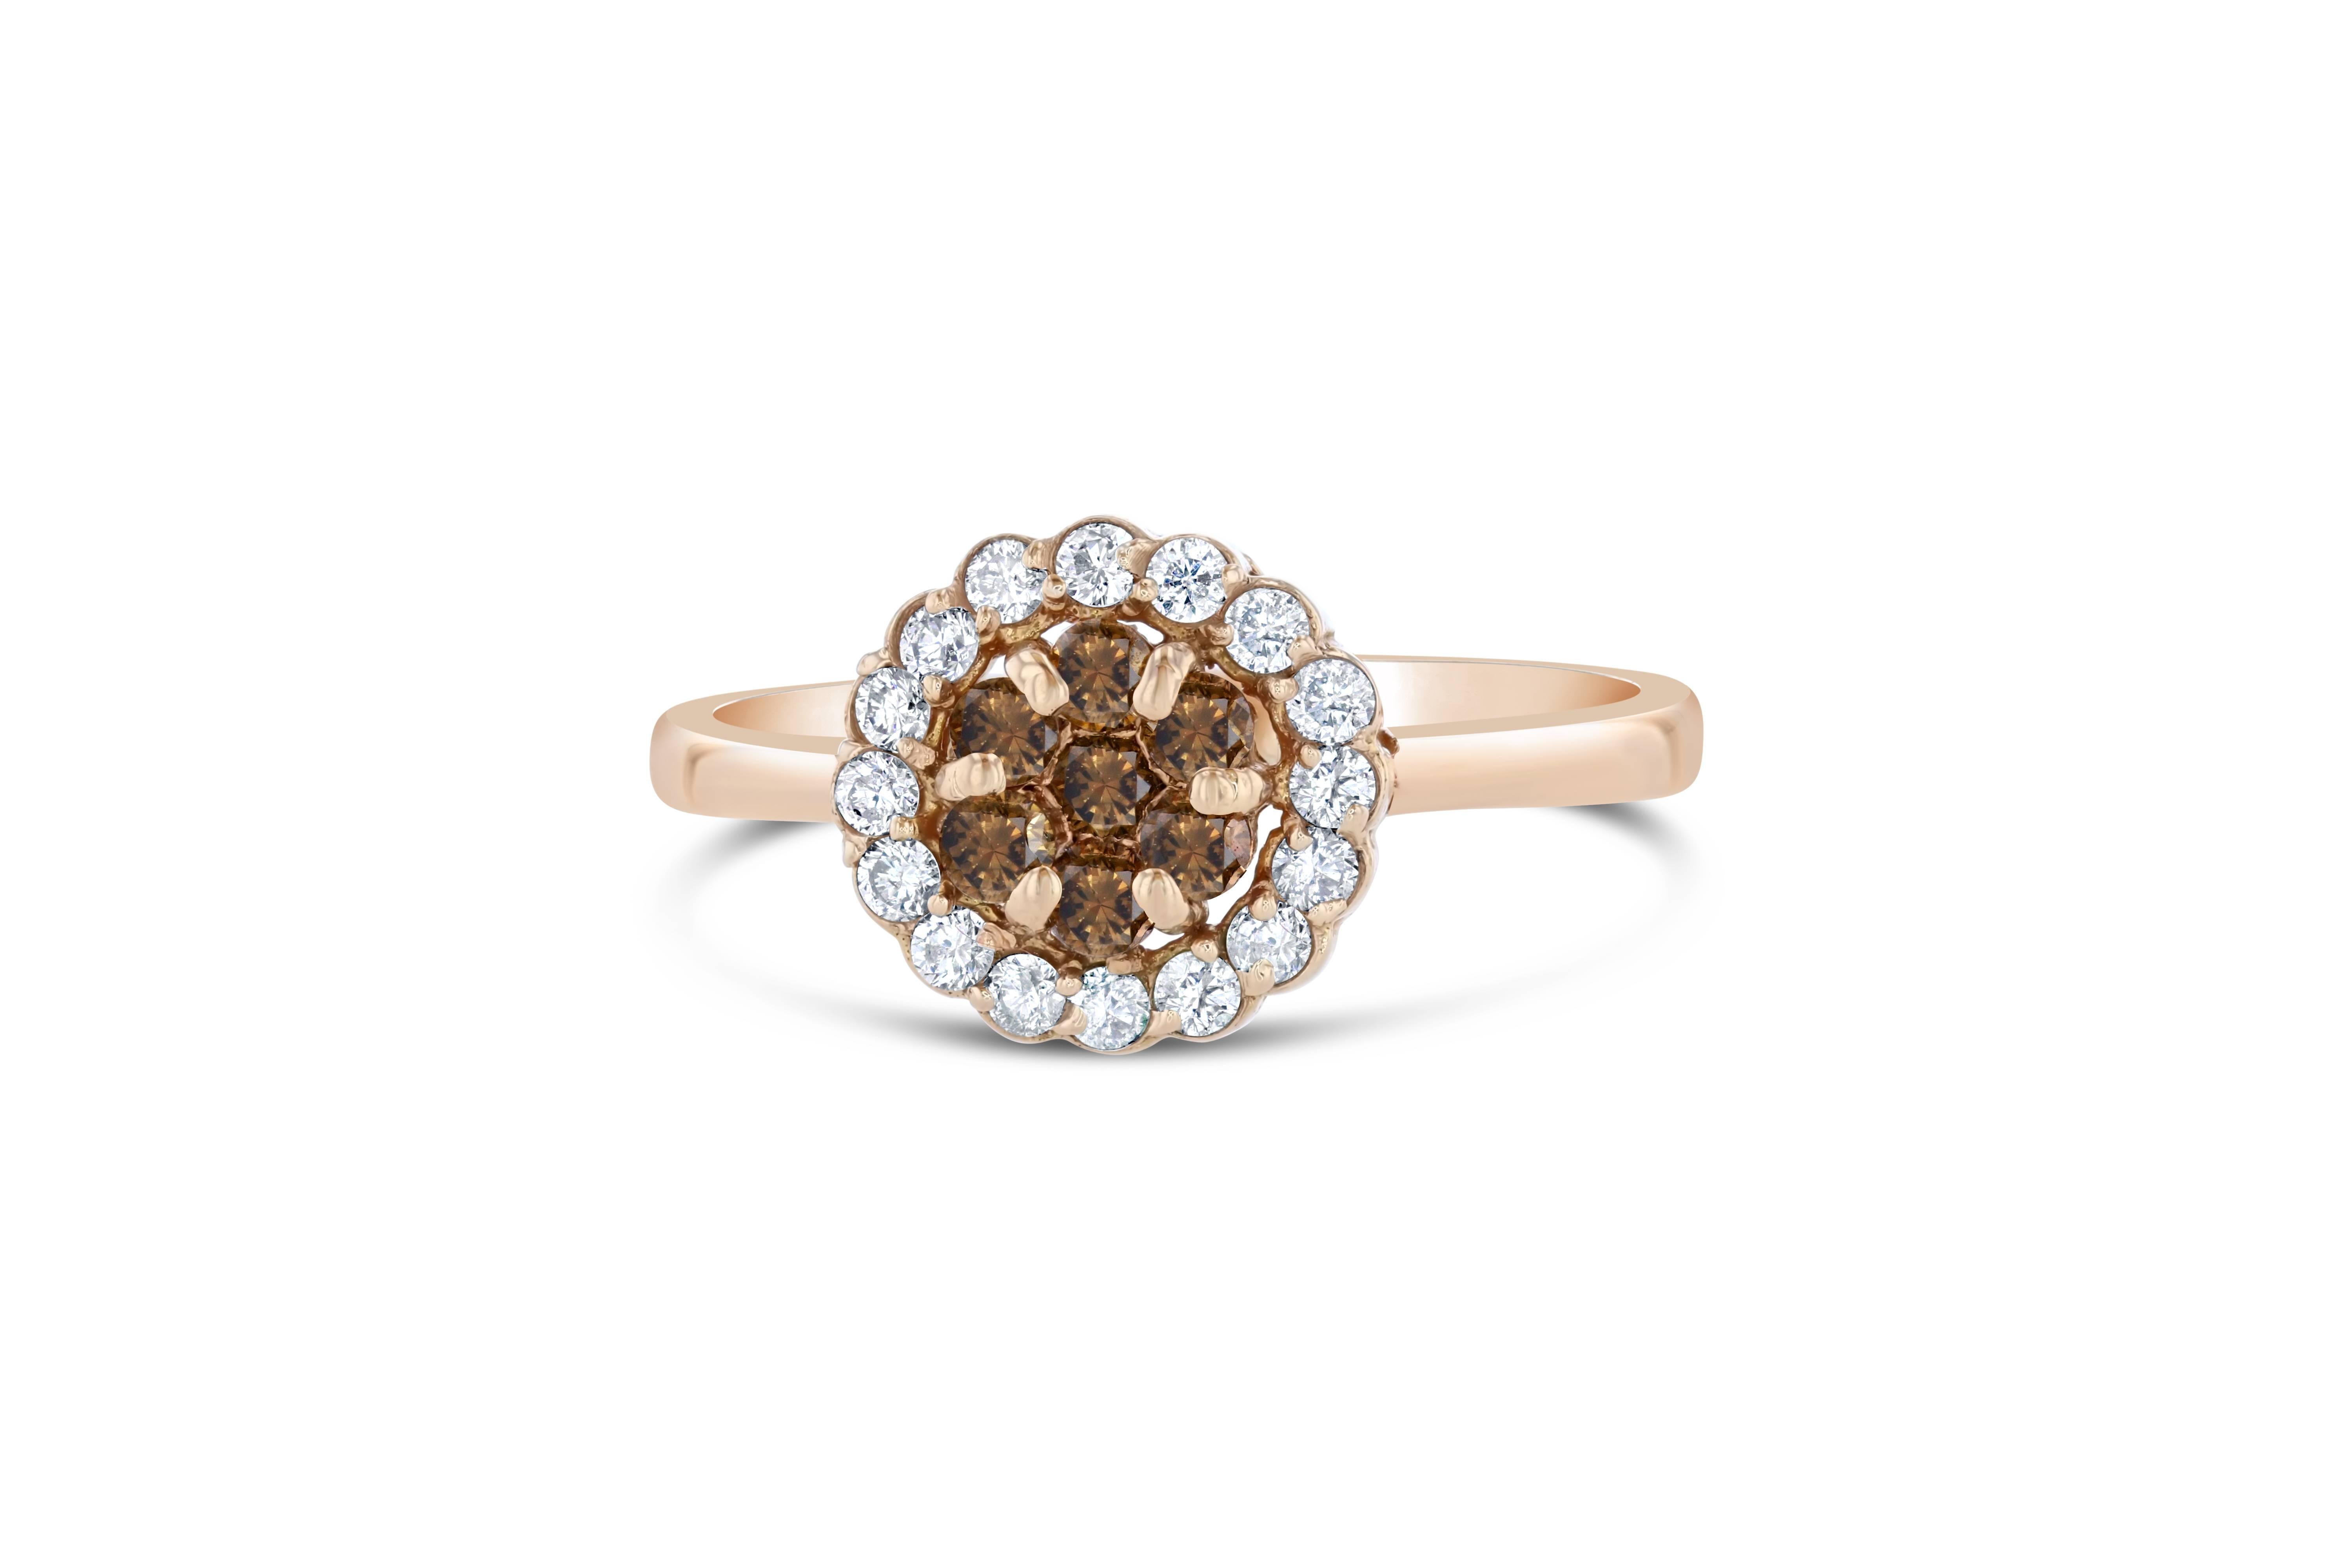 This is a cute and dainty cluster ring that gives the illusion of a flower in the center of the ring.

There are 7 natural and fancy colored brown round cut diamonds that weigh 0.27 carat and there are 16 white round cut diamonds that weigh 0.27